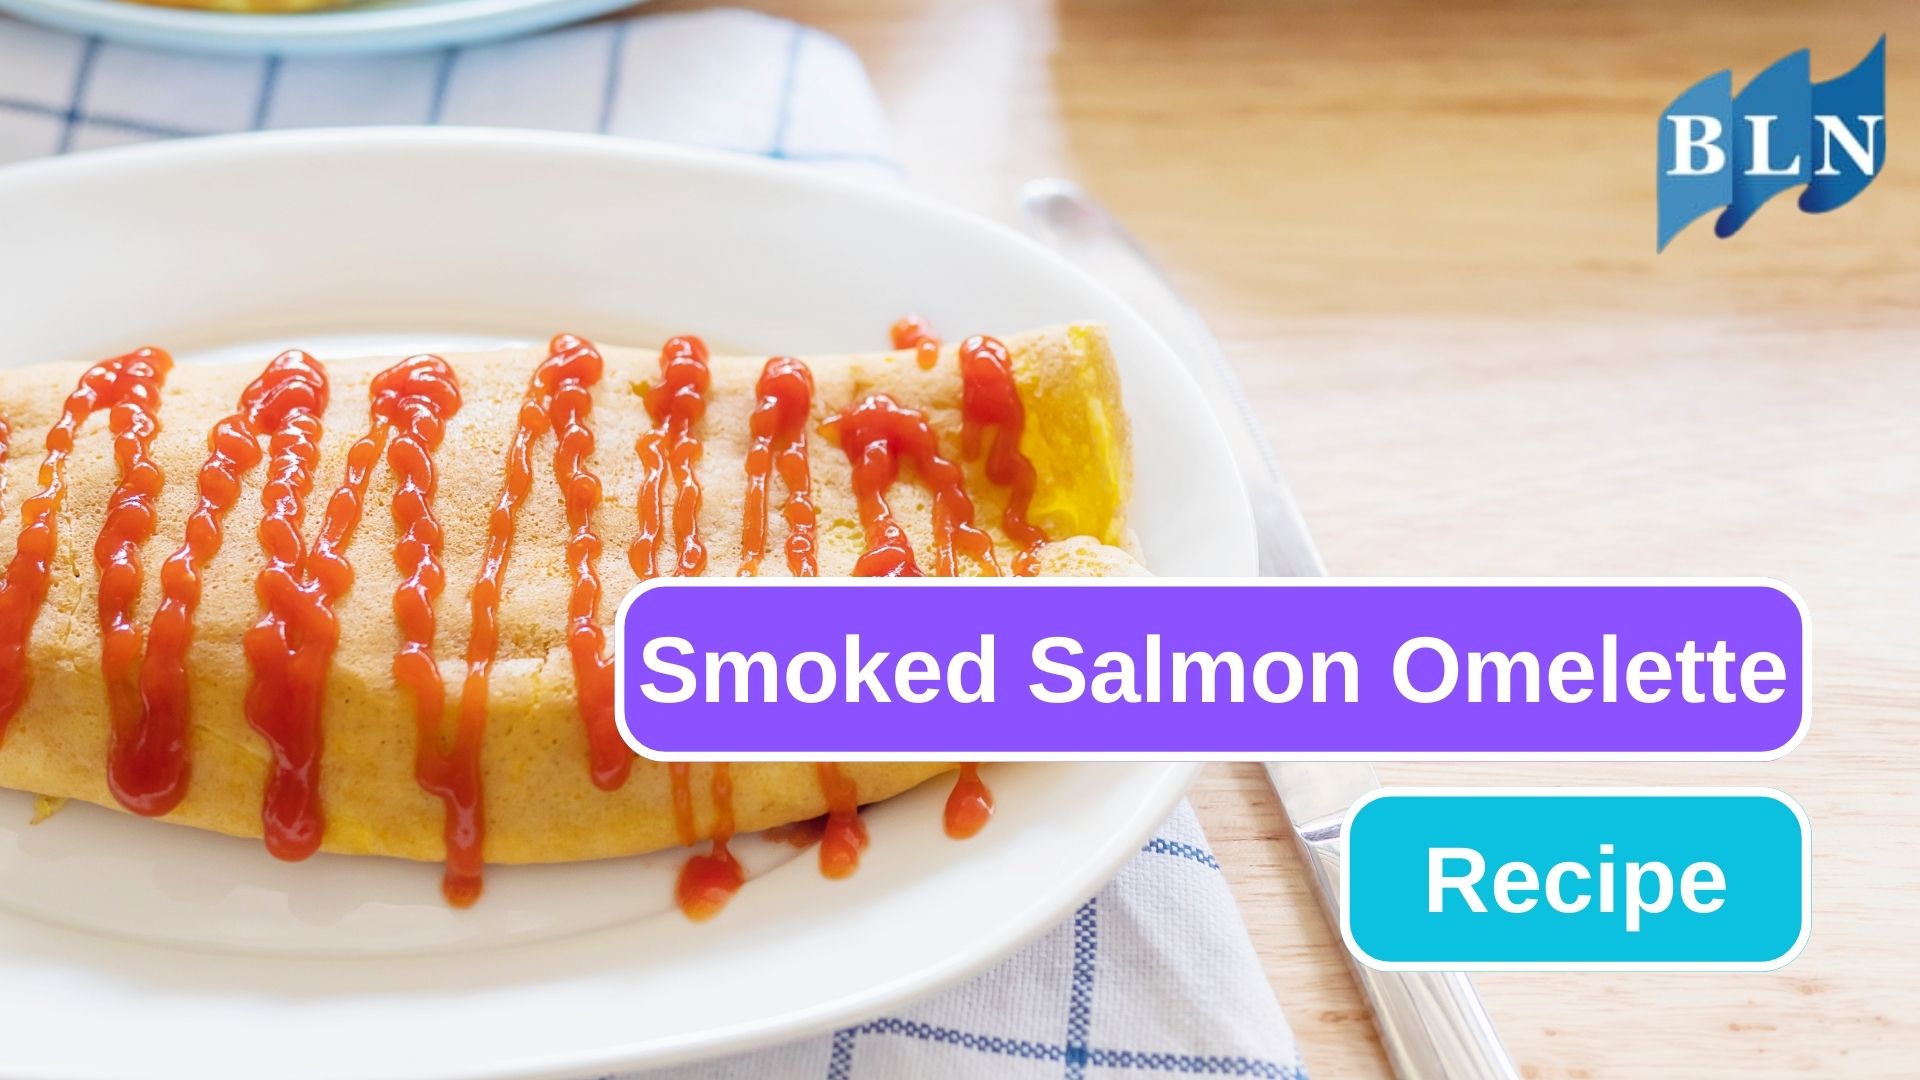 A Perfect Recipe of Smoked Salmon Omelette